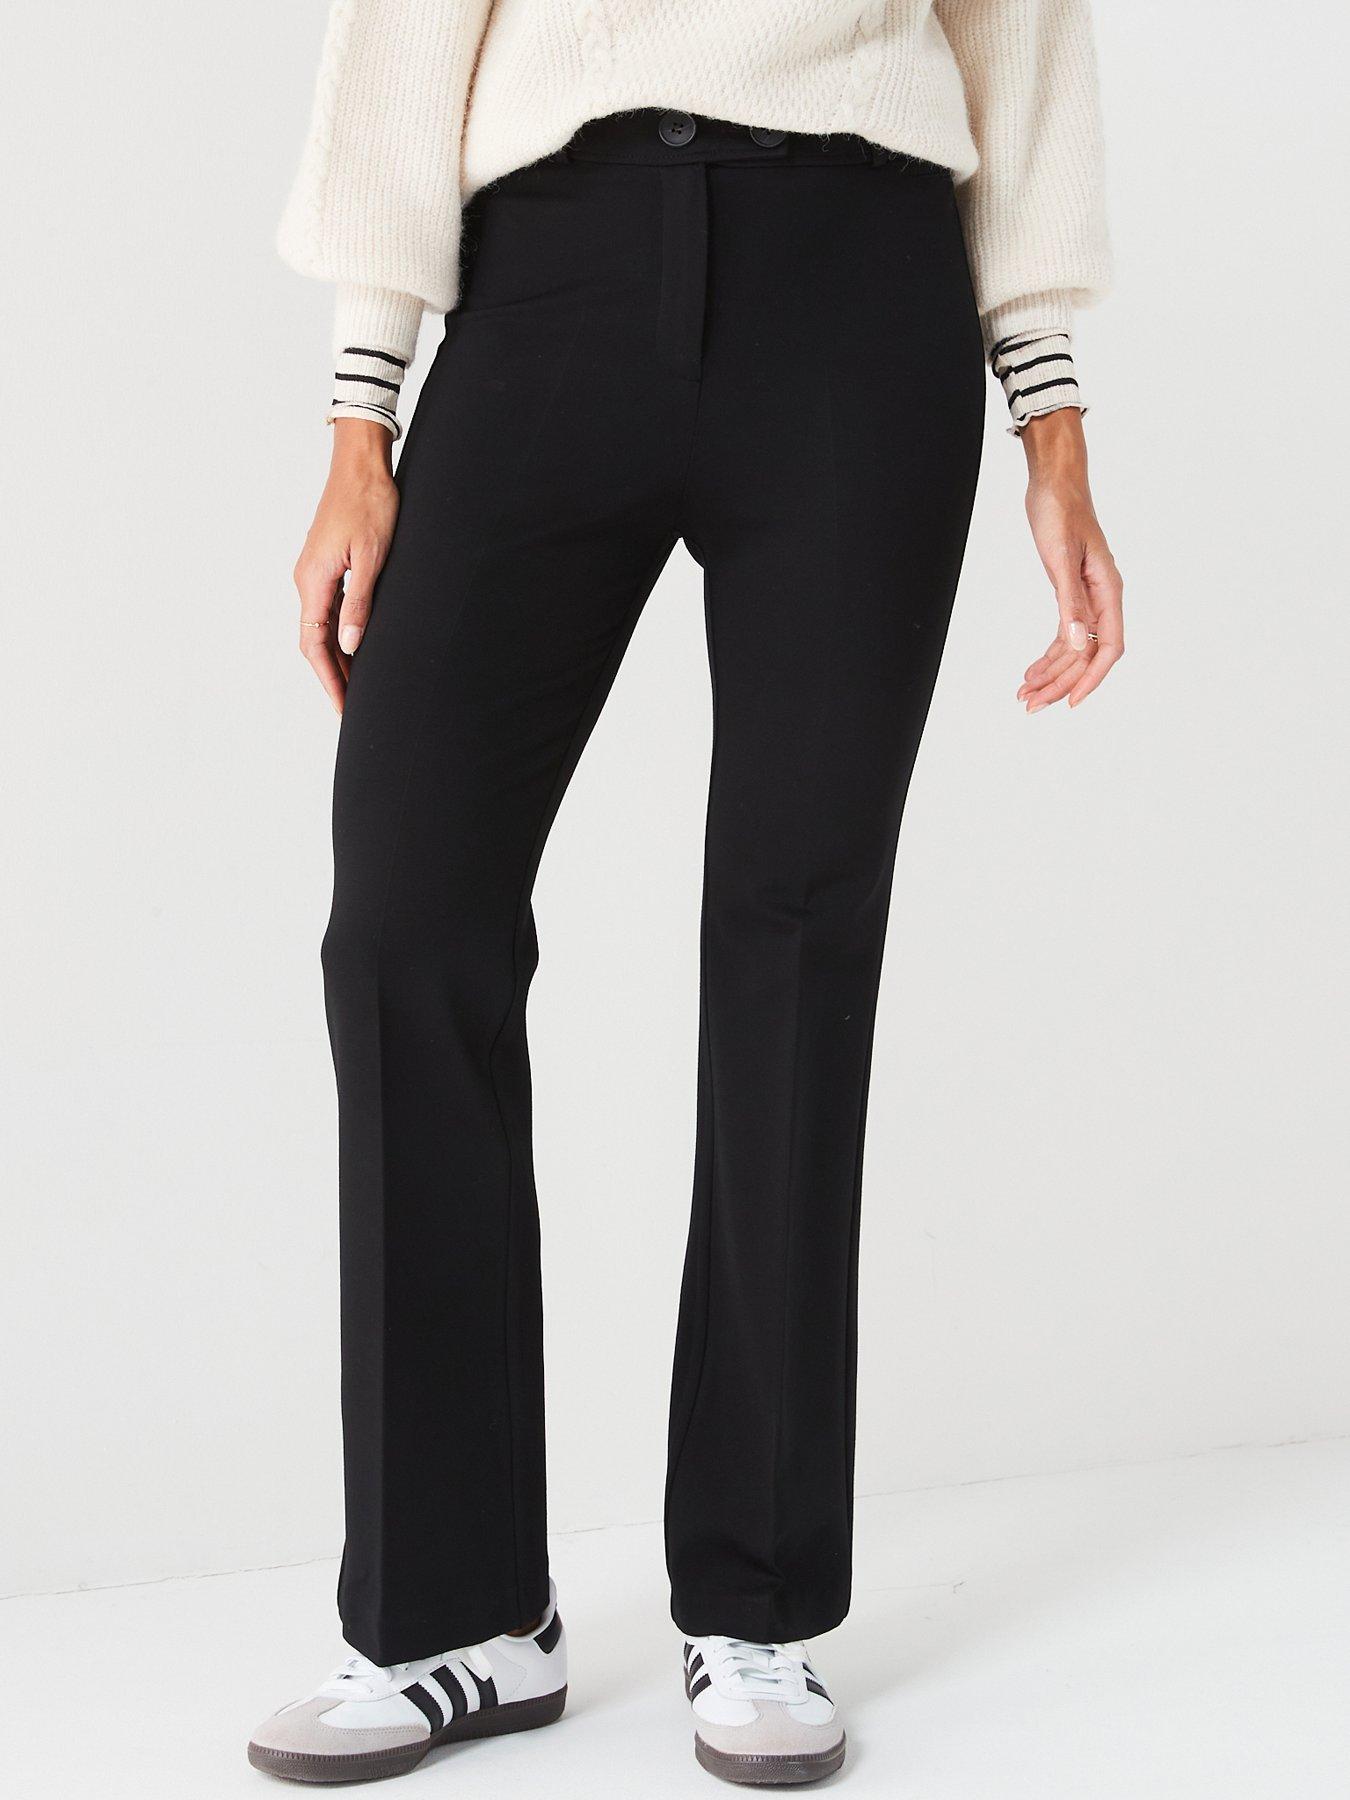 Thursday's Workwear Report: Tailored Wide-Leg Pants 